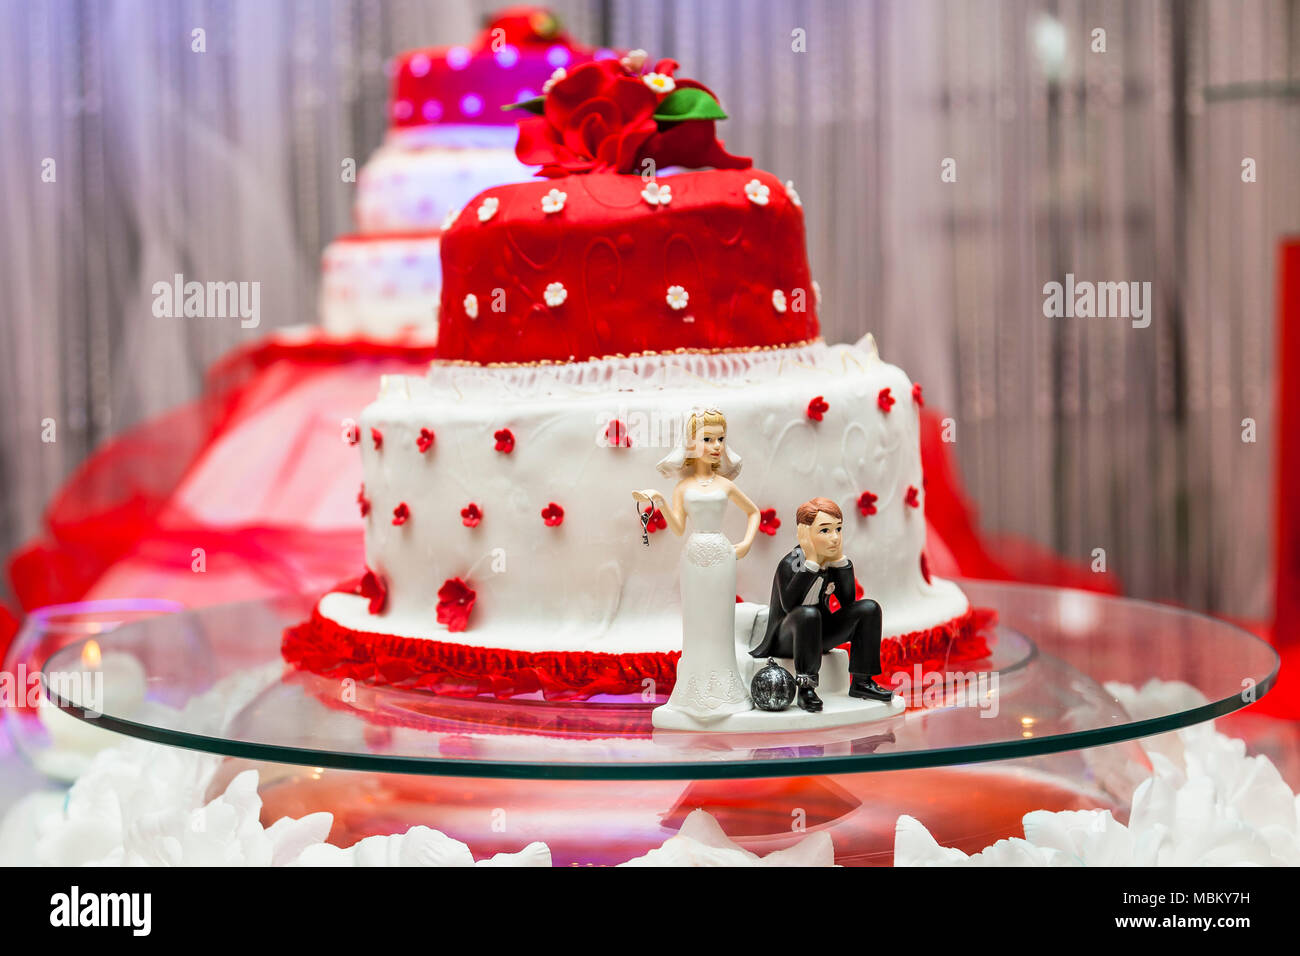 Figurines On Bottom Of Red And White Wedding Cake Stock Photo